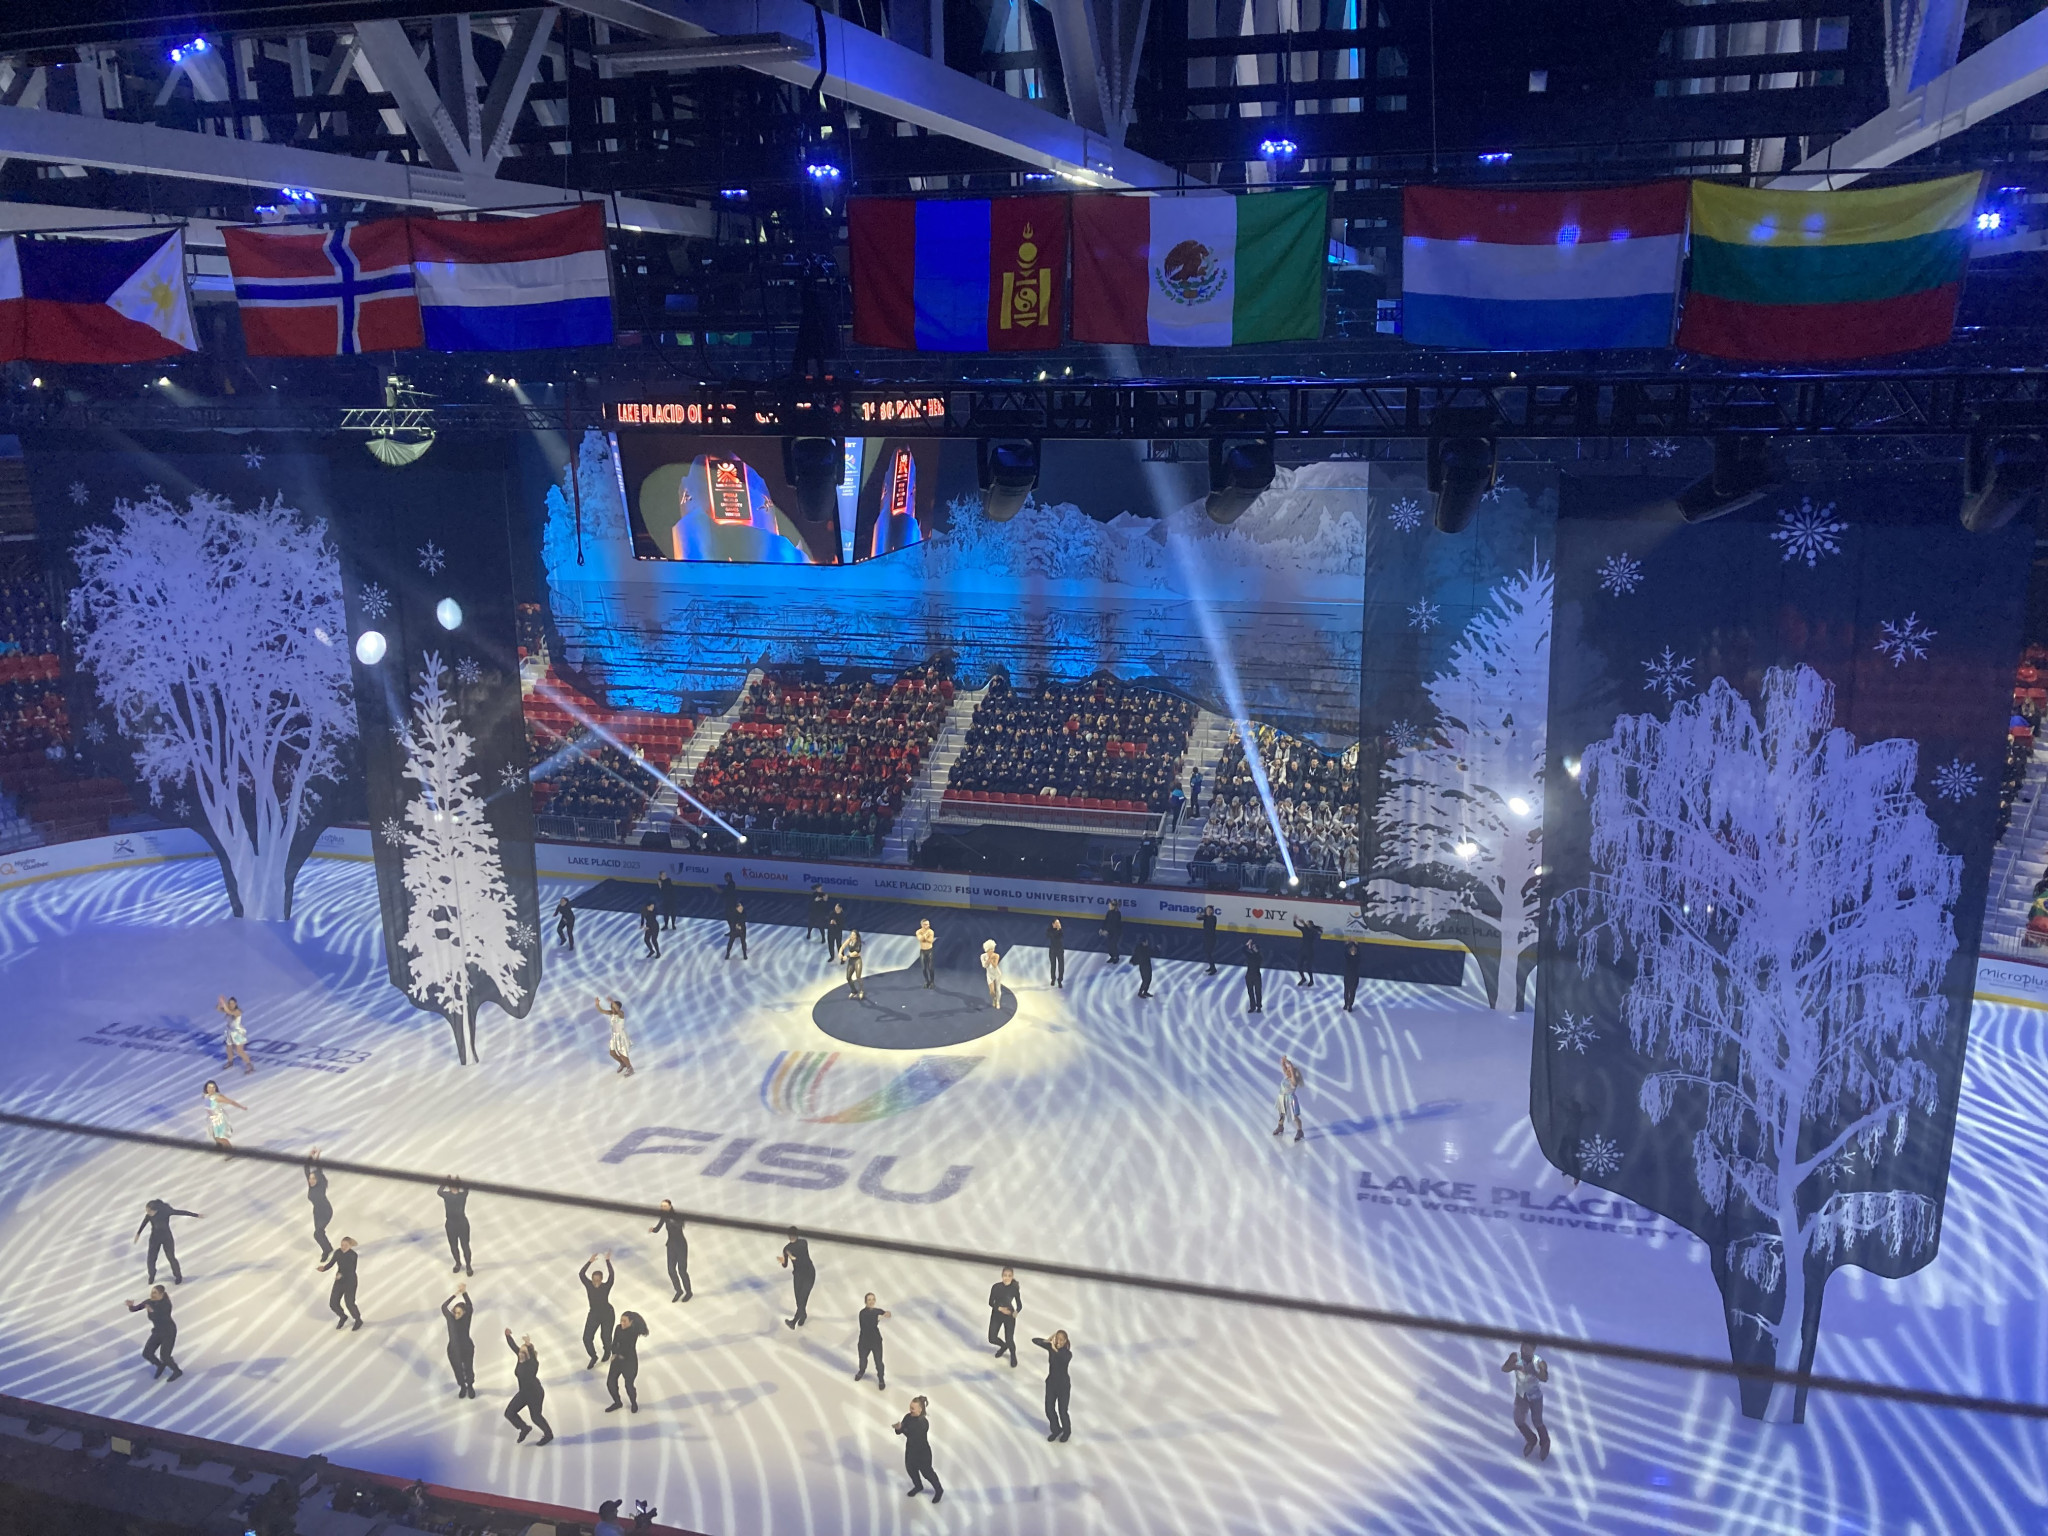 insidethegames is reporting LIVE from the FISU Winter World University Games in Lake Placid